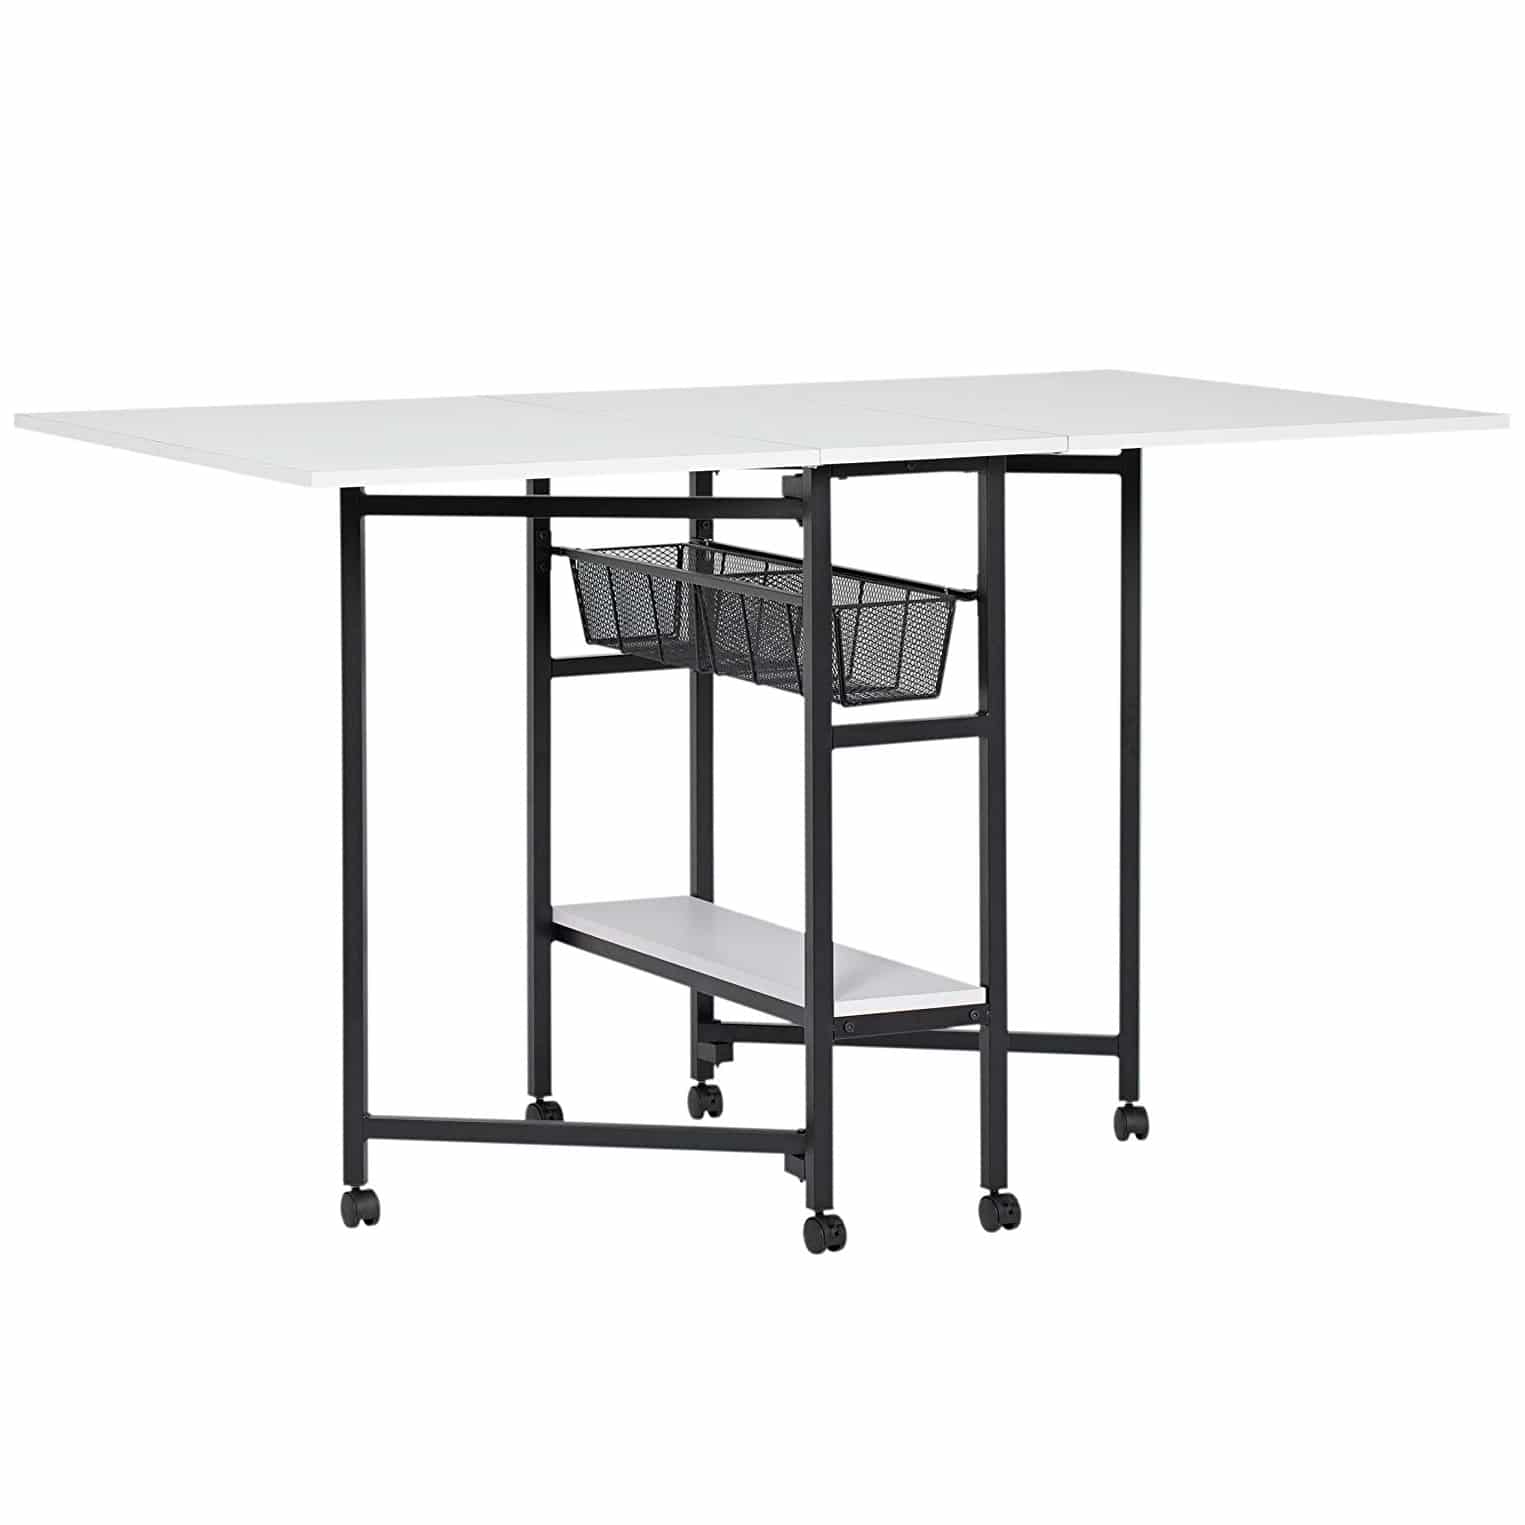 Craft & Hobby Essentials 62006 Charcoal Black/White Standing Table